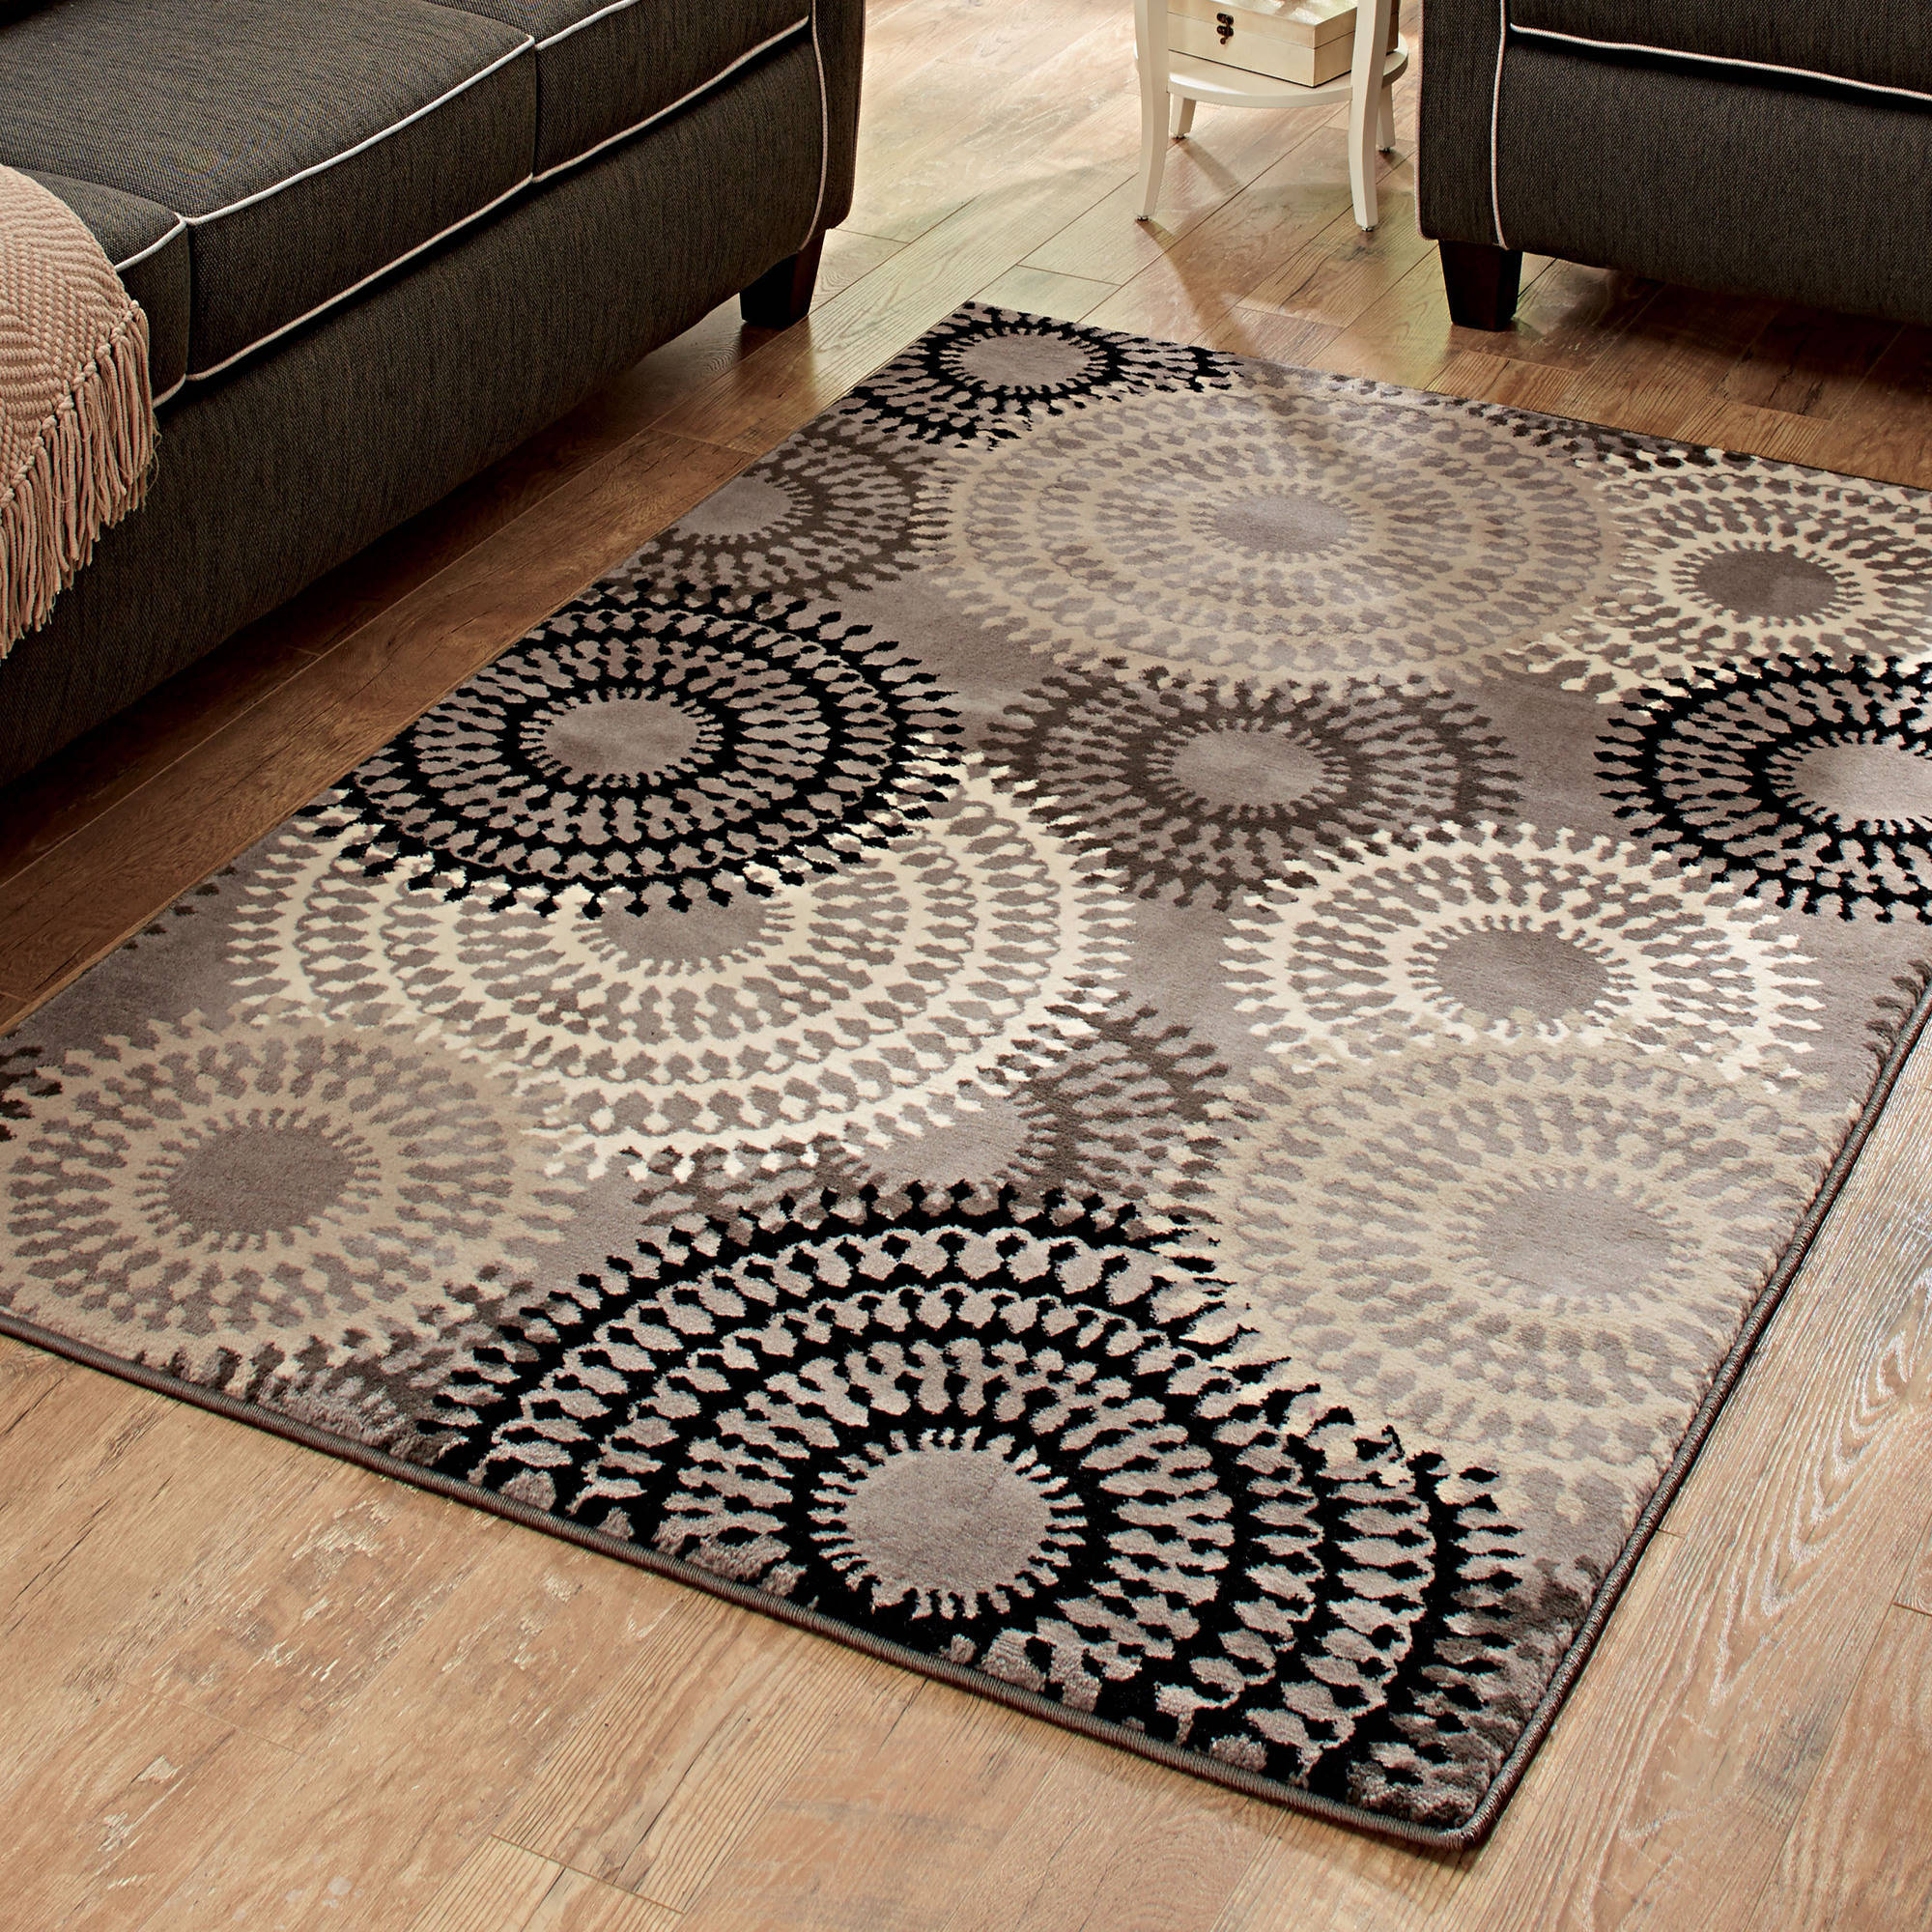 Better Homes & Gardens Taupe Ornate Circles Area Rug - image 1 of 8